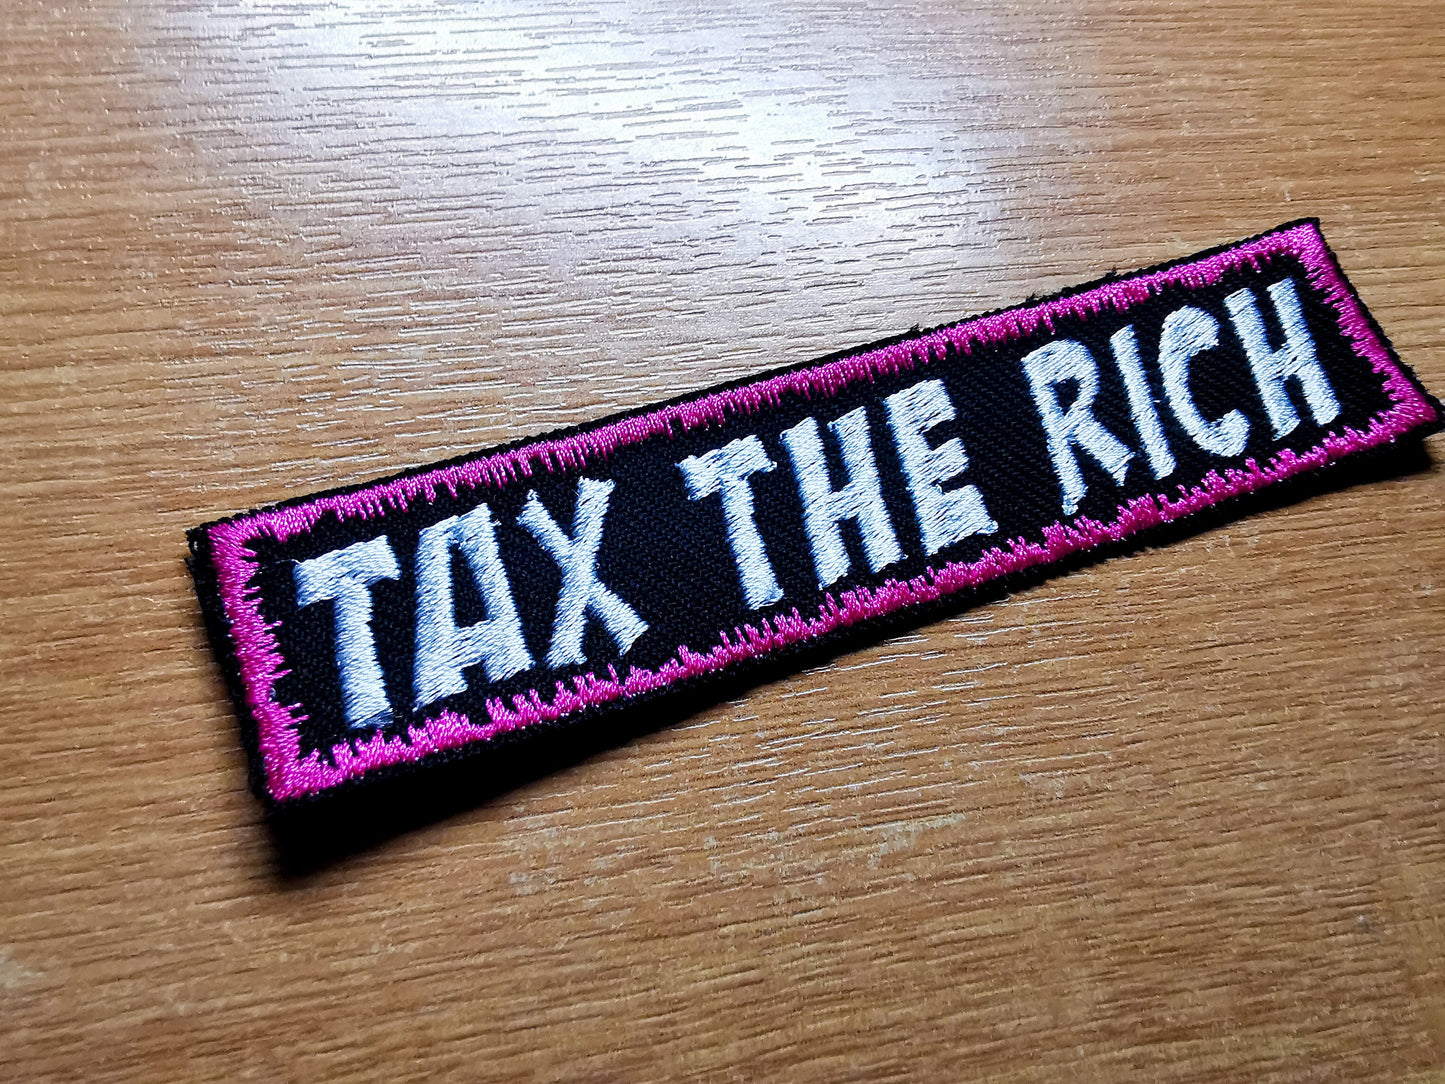 Tax The Rich Embroidered Iron On Patch Politics Punk Billionaire Capitalism Flamingo Pink Border